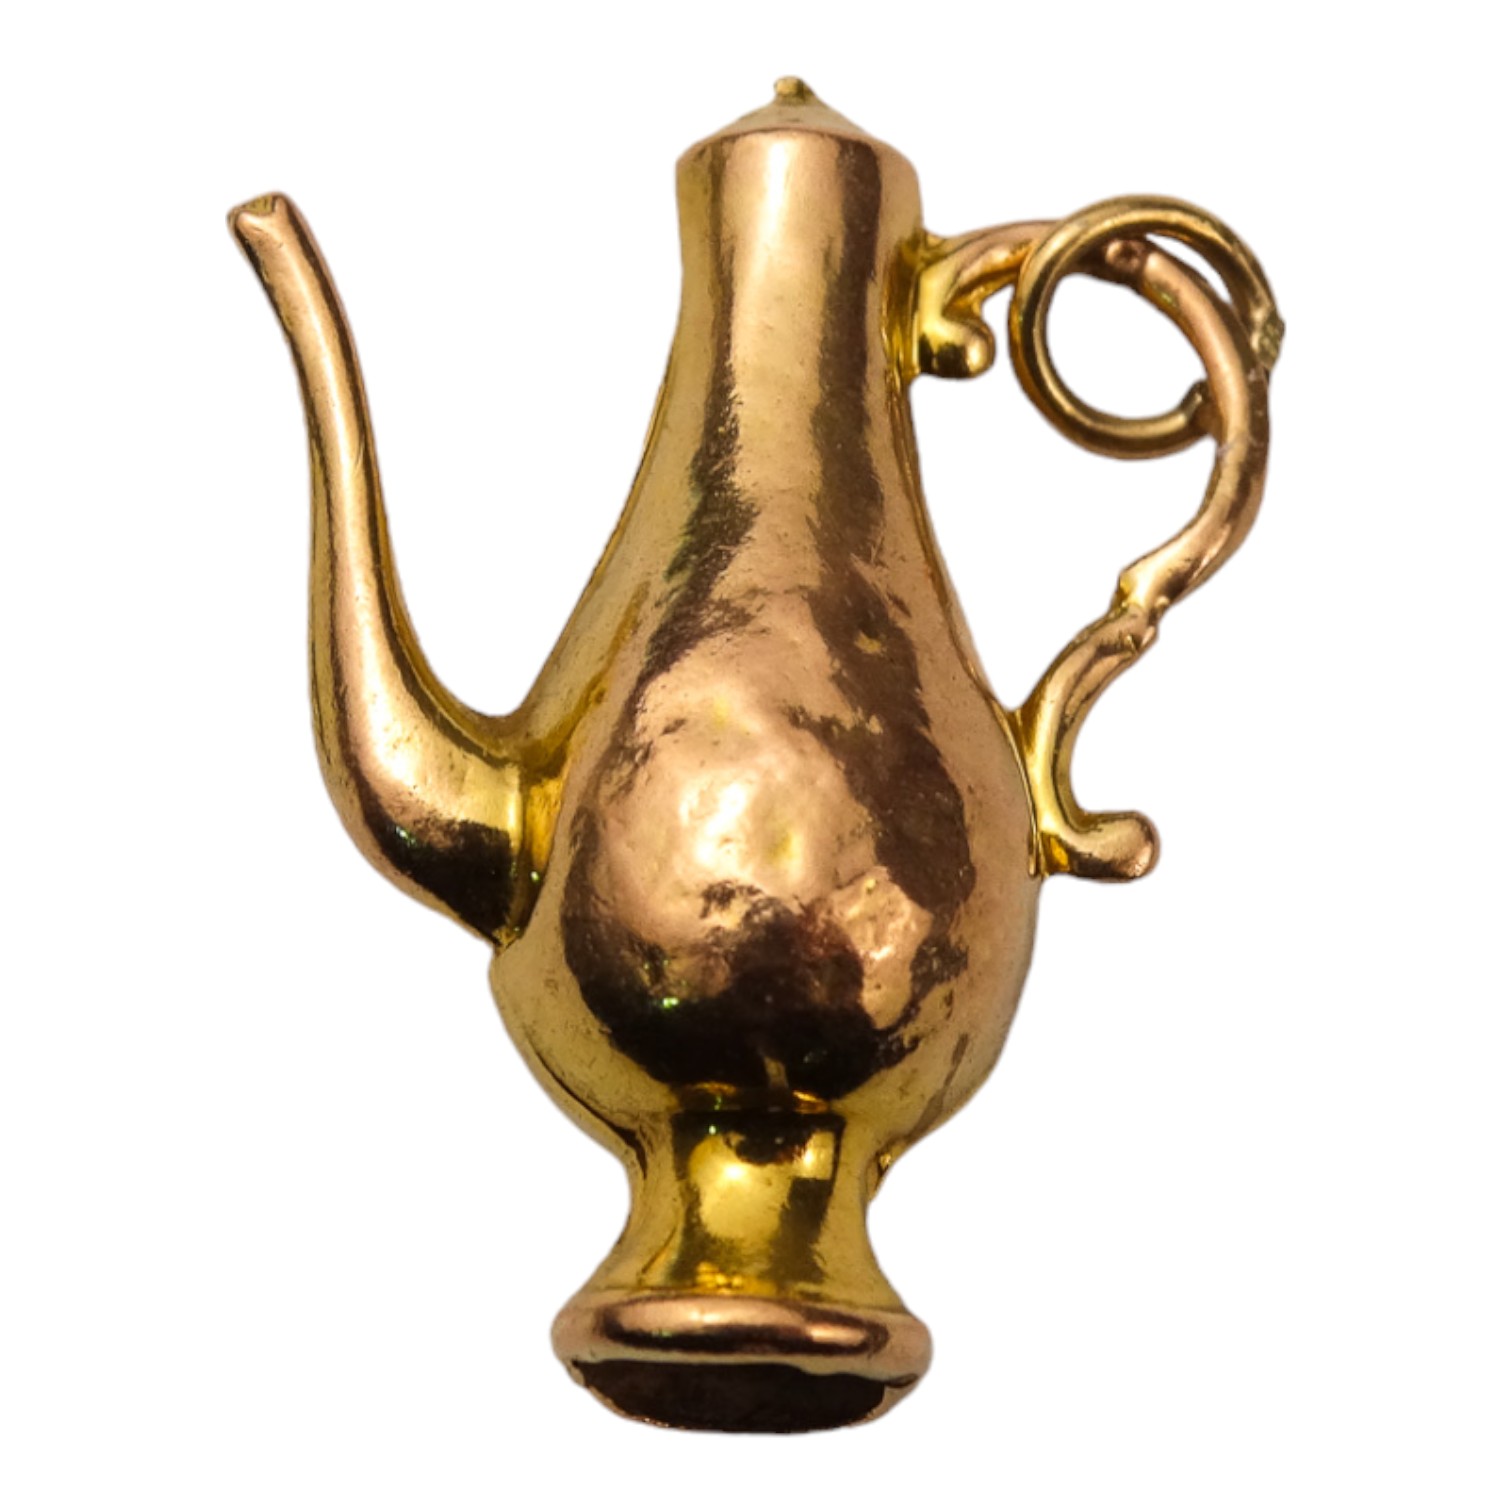 A 9ct gold charm - modelled as a coffee pot, weight 0.8g.